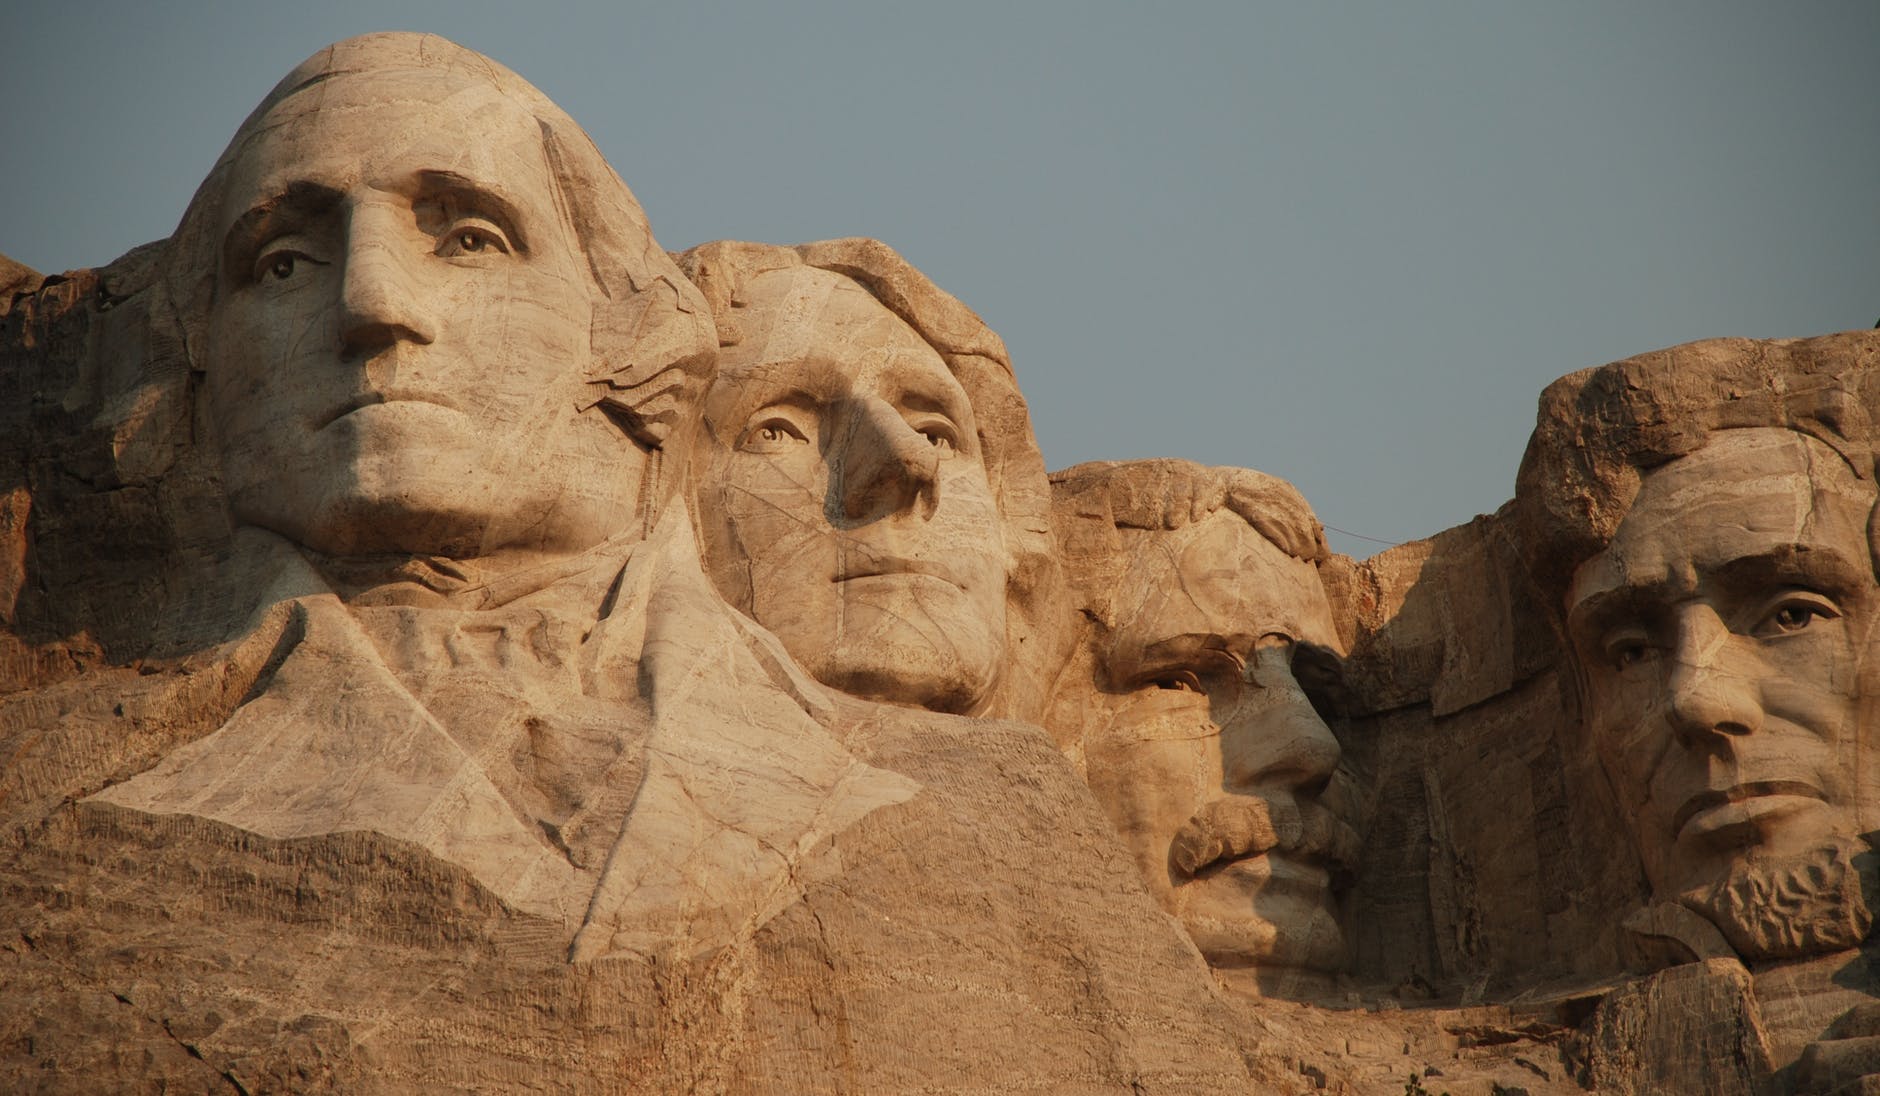 They discussed that the treasure could be hidden in Mount Rushmore. | Source: Pexels